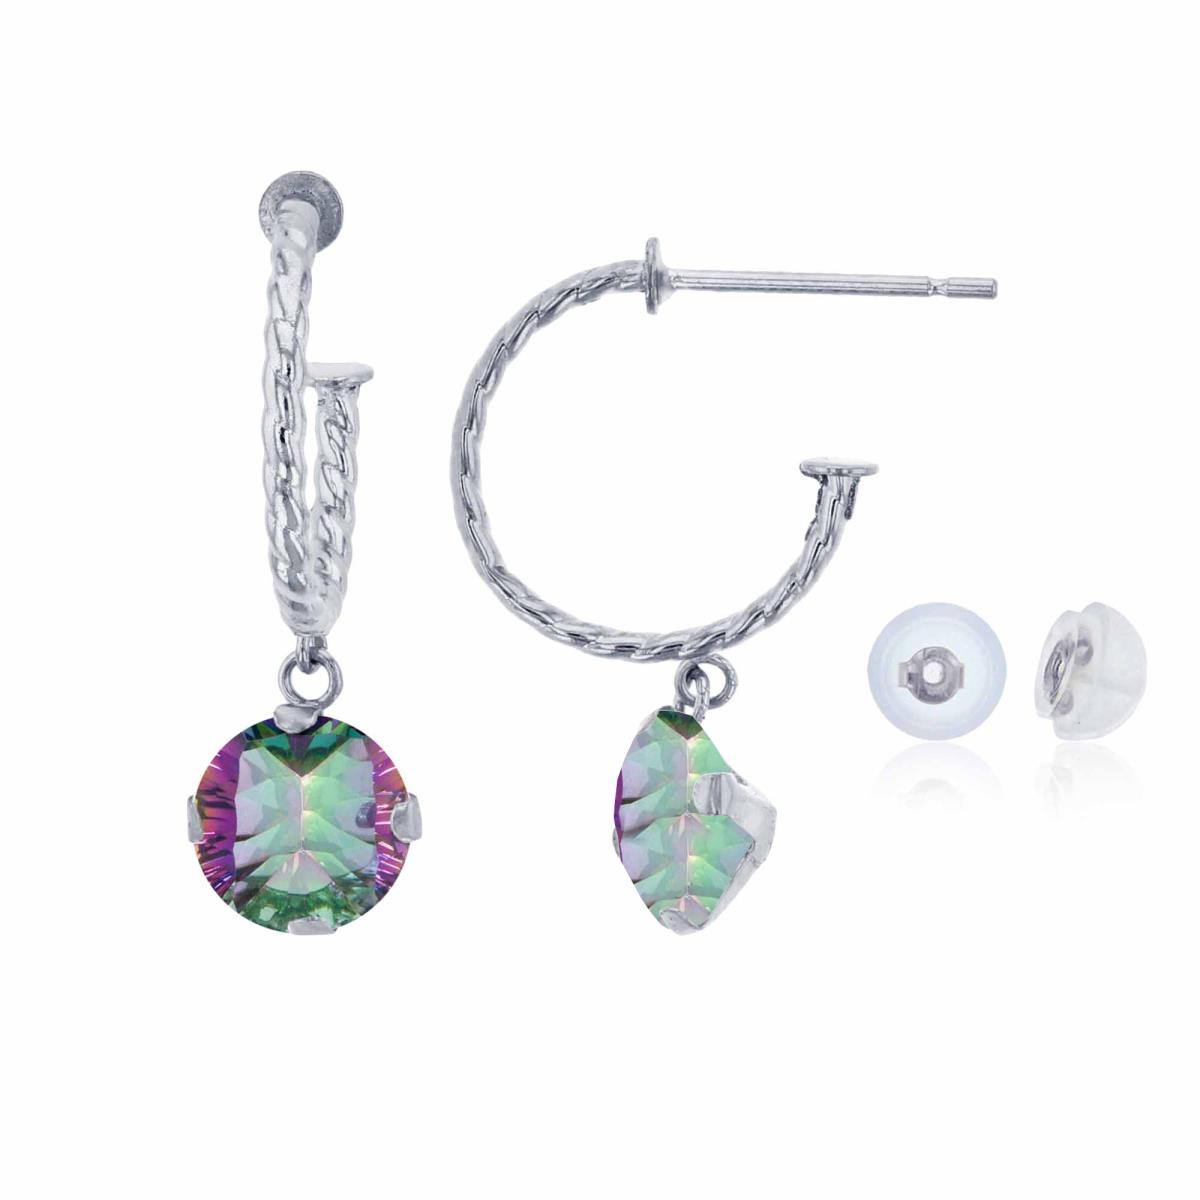 10K White Gold 12mm Rope Half-Hoop with 6mm Rd Mystic Green Quartz Martini Drop Earring with Silicone Back